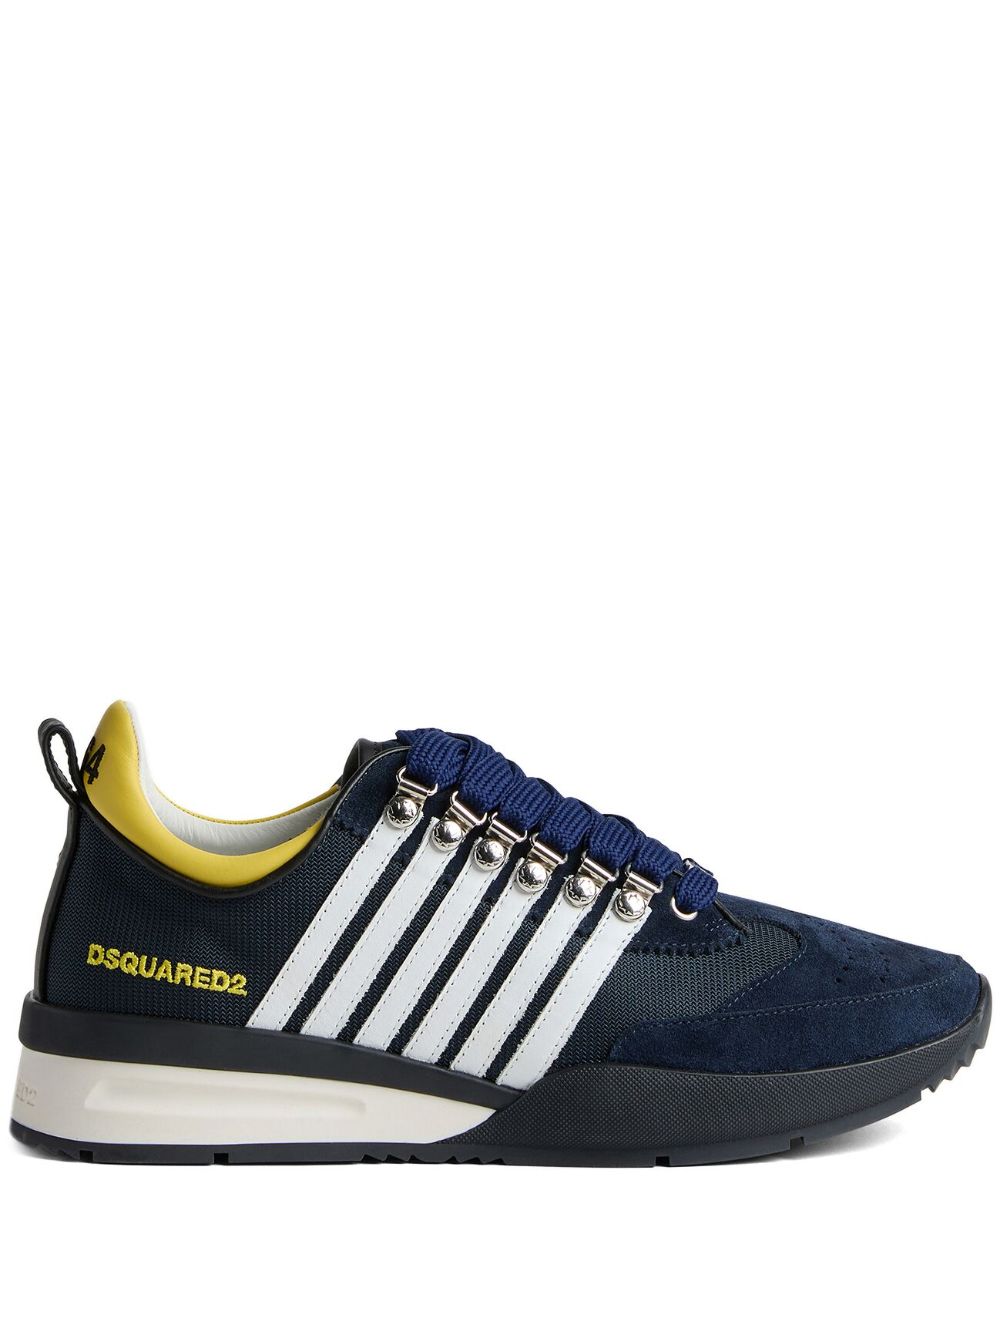 DSQUARED2 Navy Blue Multicolour Low Top Sneakers for Men